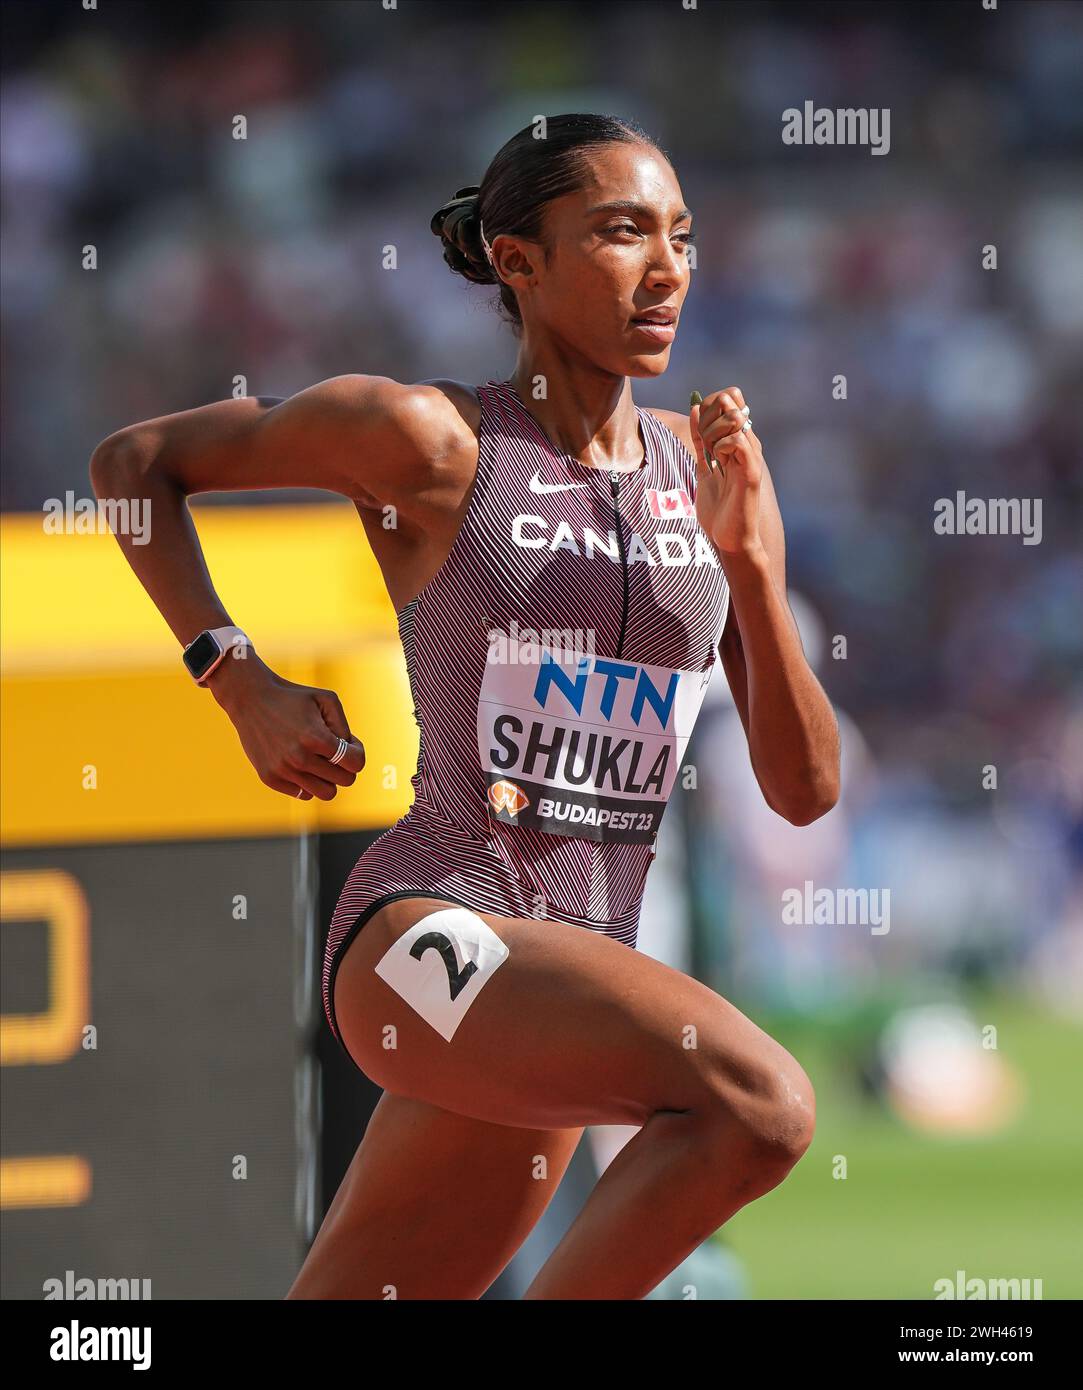 Jazz SHUKLA participating in the 800 meters at the World Athletics ...